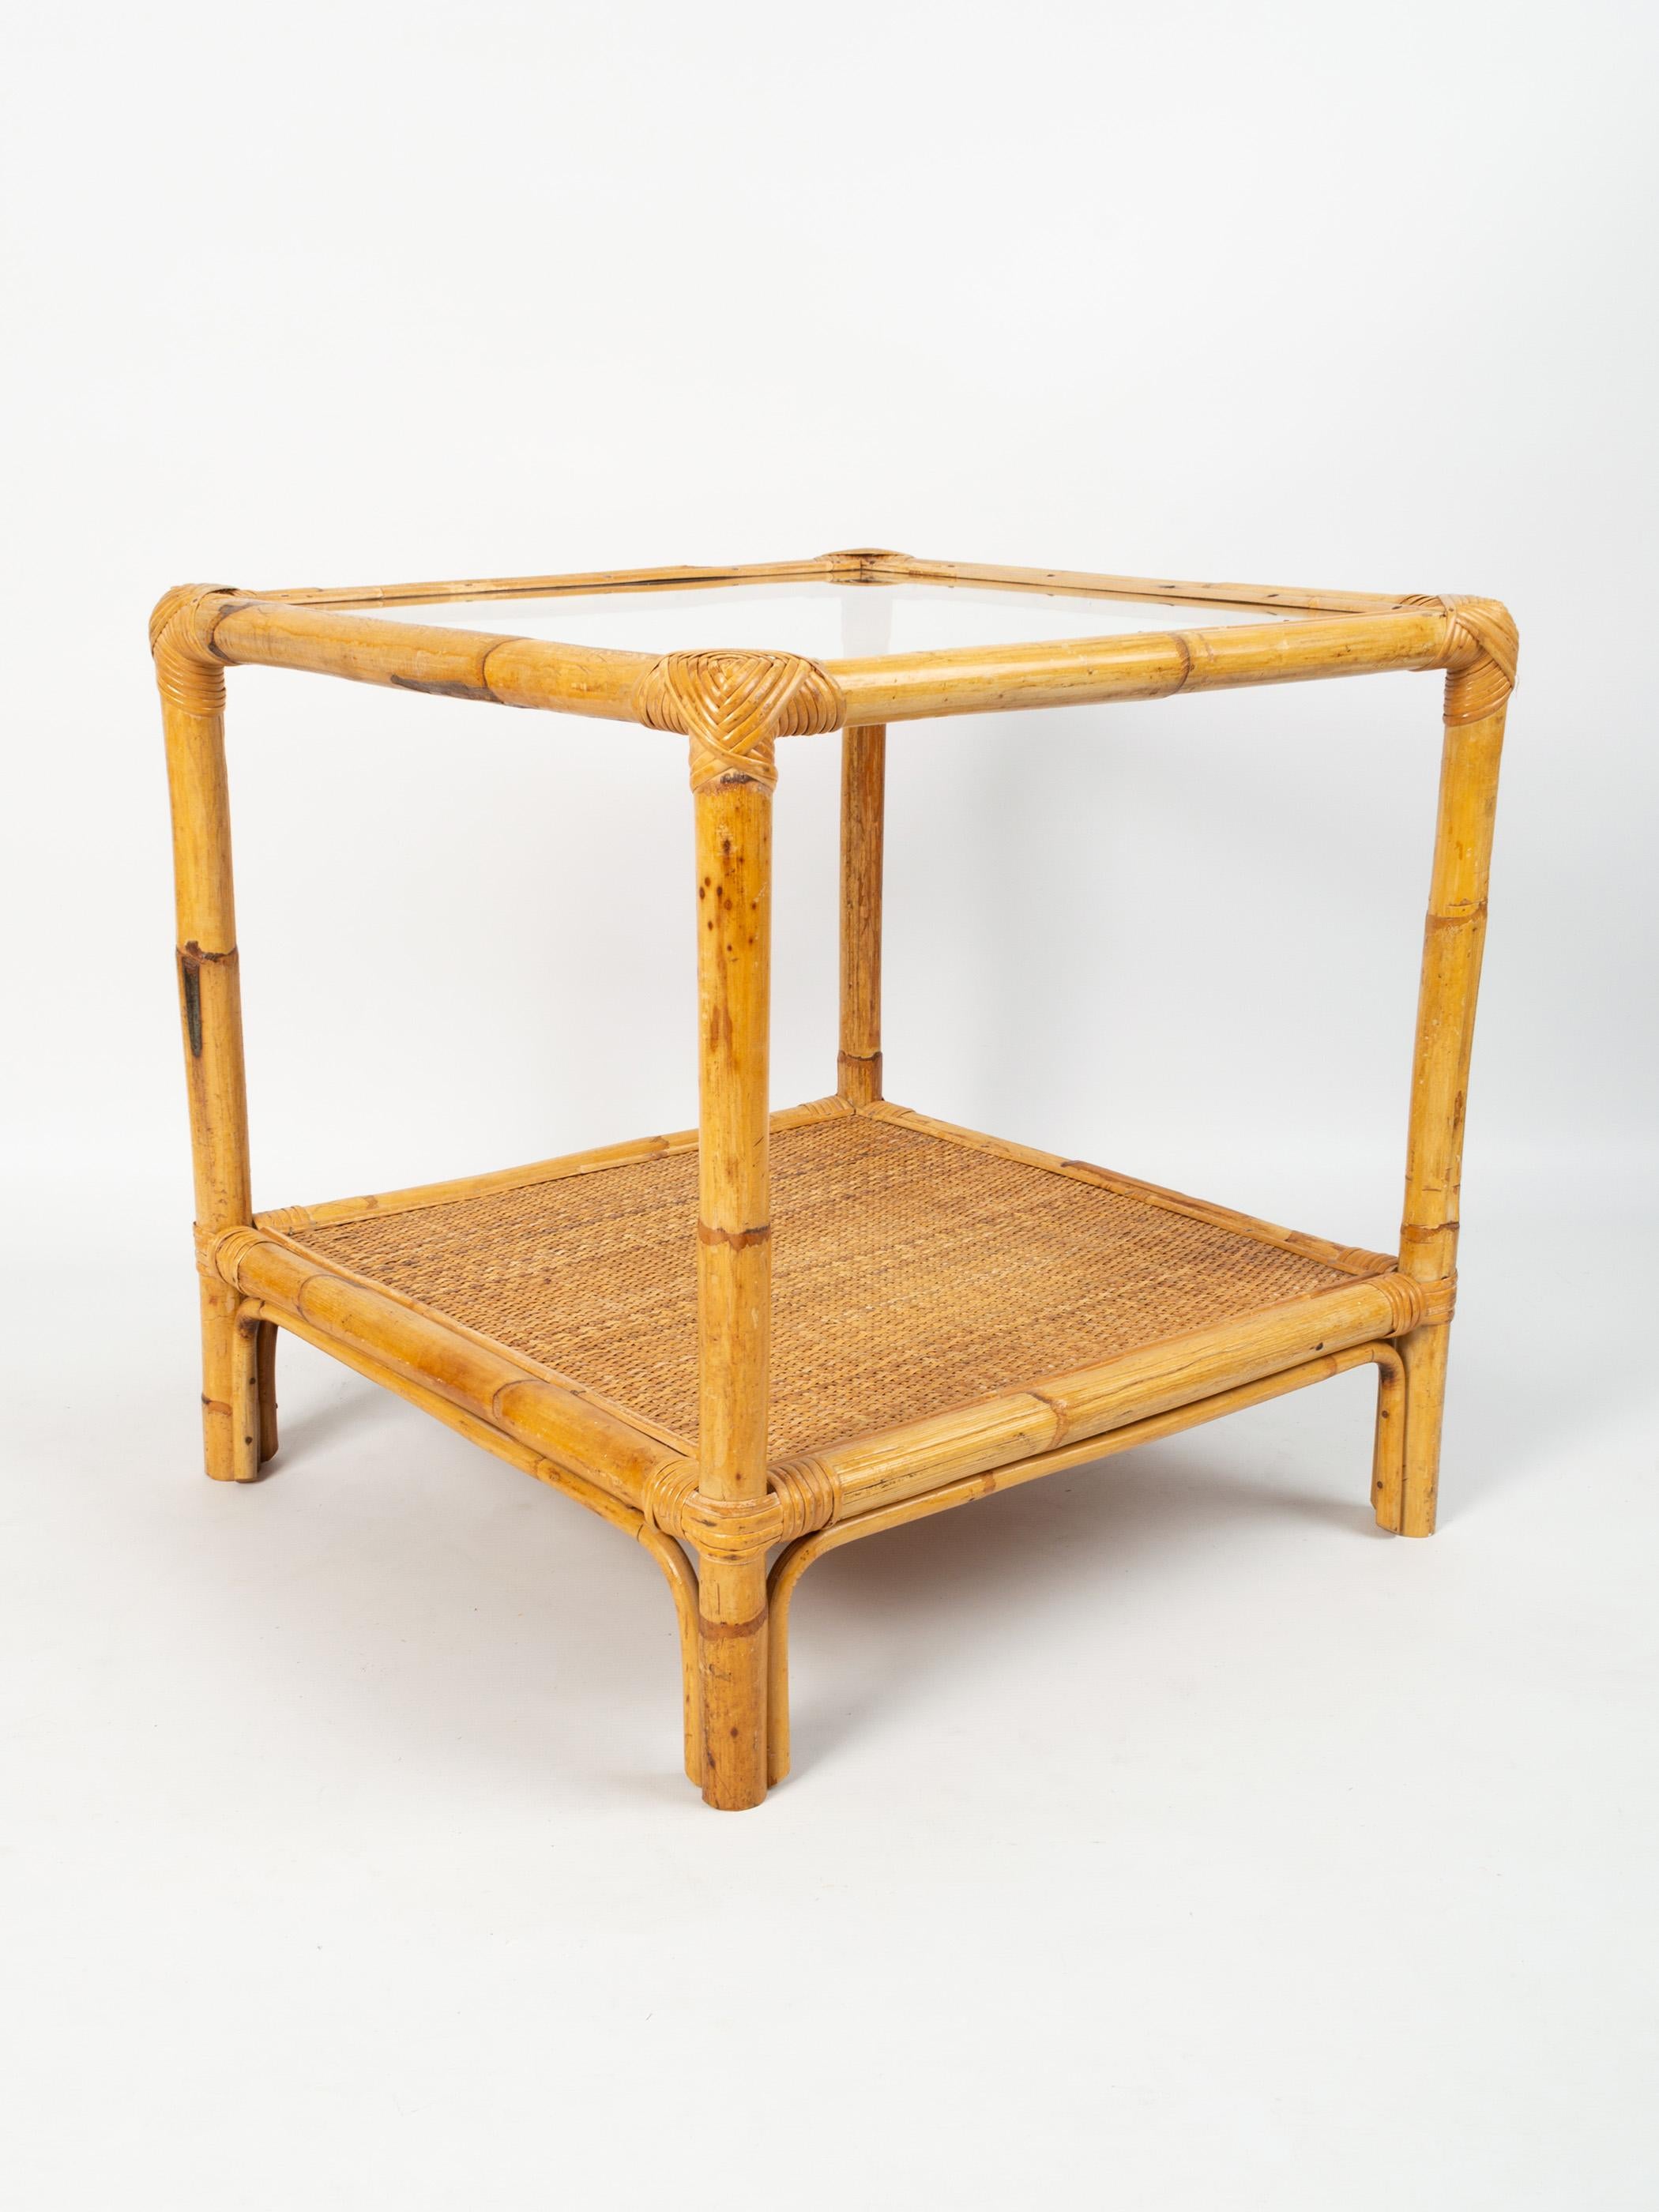 Mid century Italian bamboo and rattan coffee table side table C.1960.

Presented in excellent vintage condition.